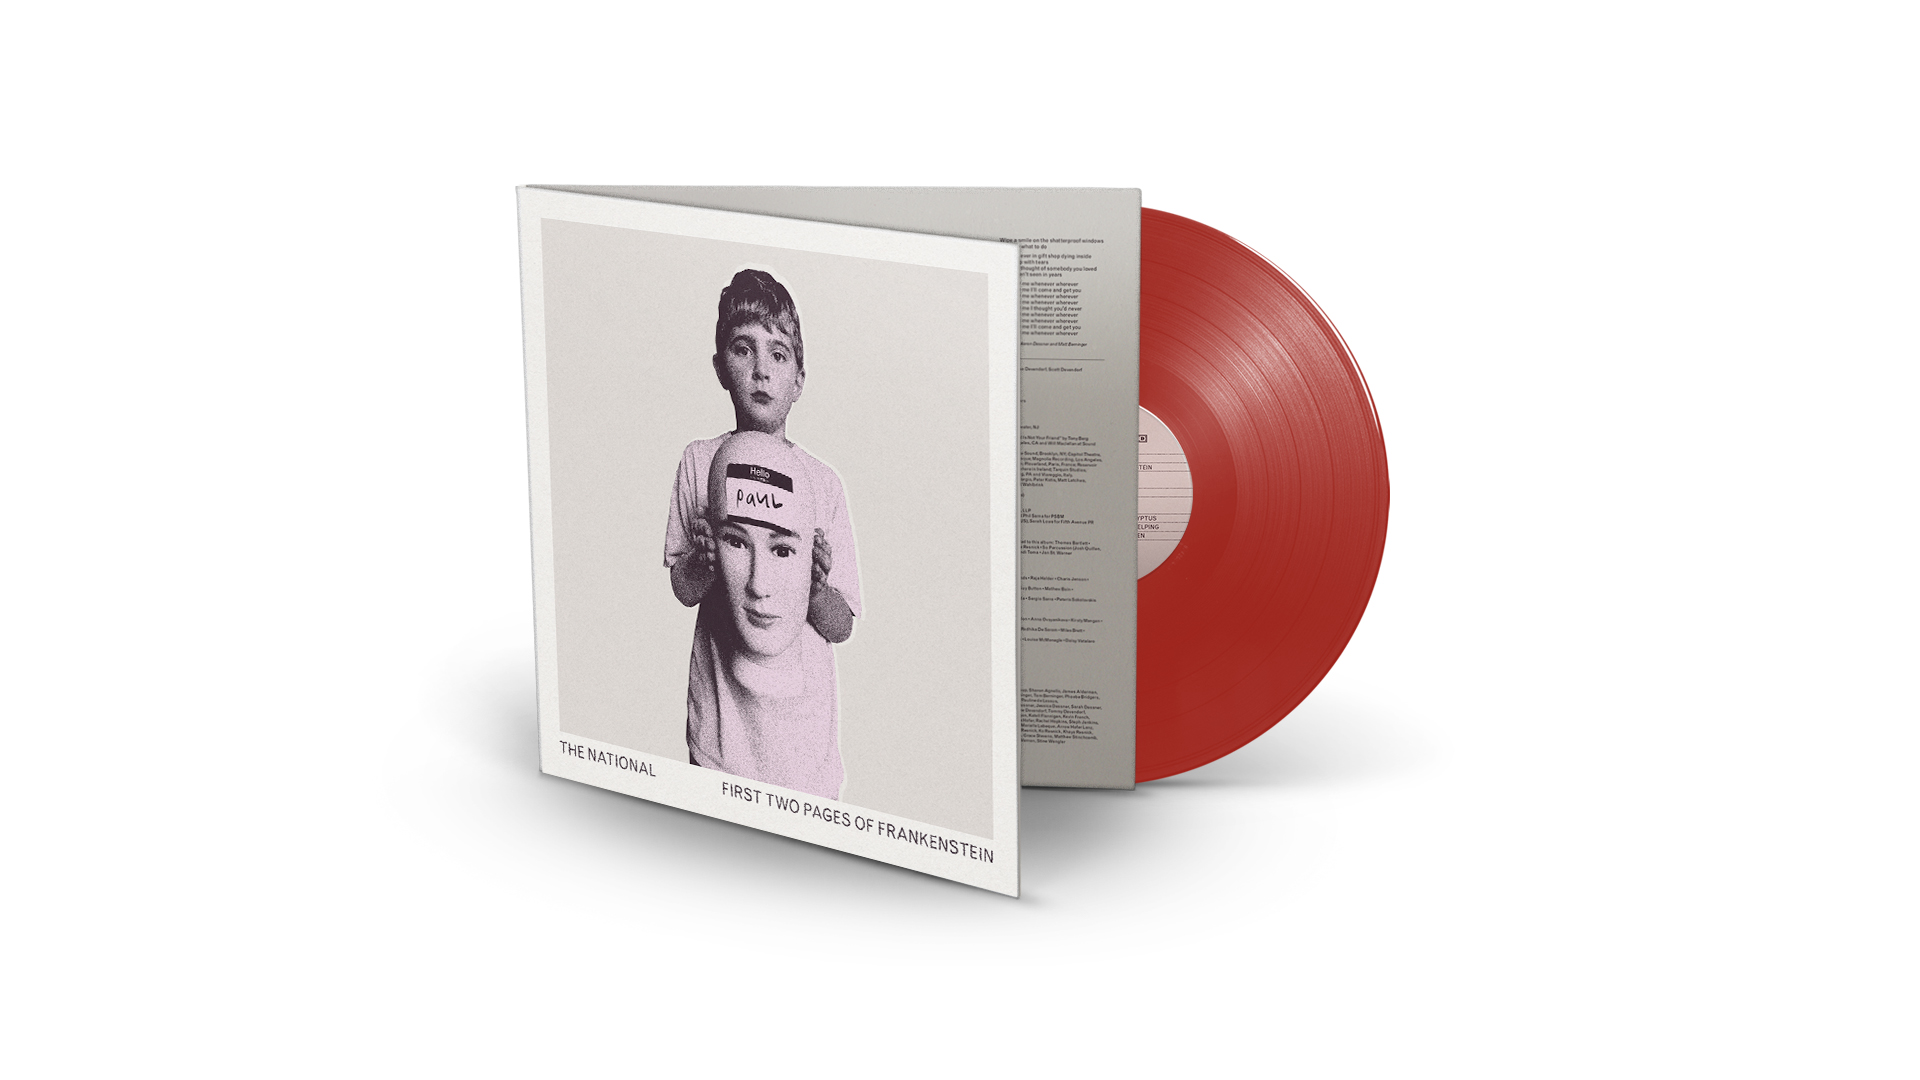 The National "First Two Pages Of Frankenstein" Red LP